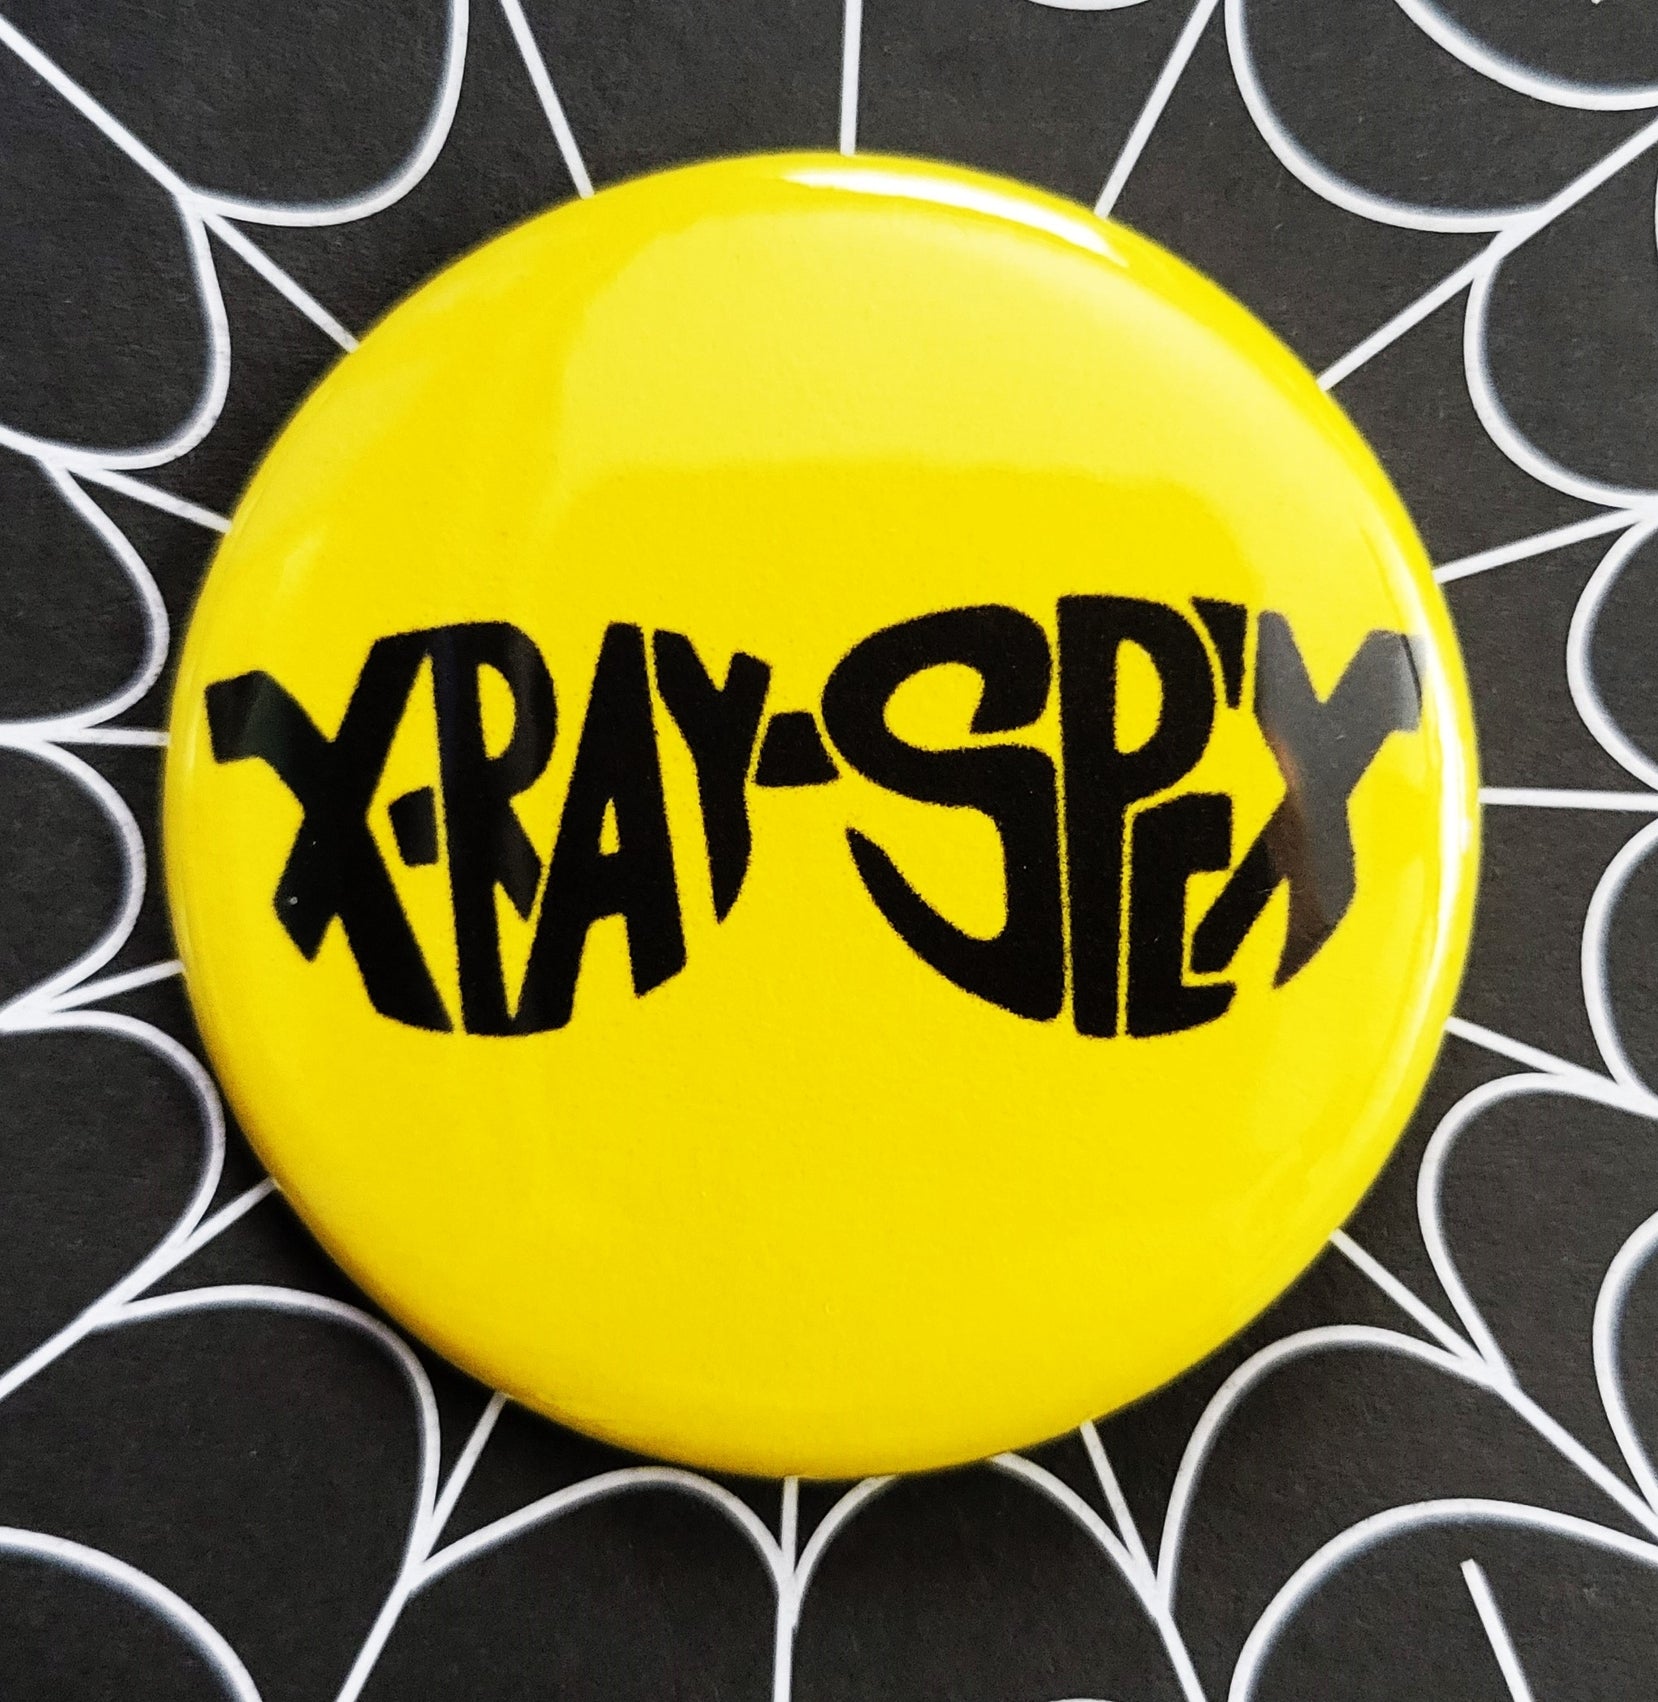 1.25” pinback button of X-Ray Spex glasses shaped band logo on a bright yellow background 